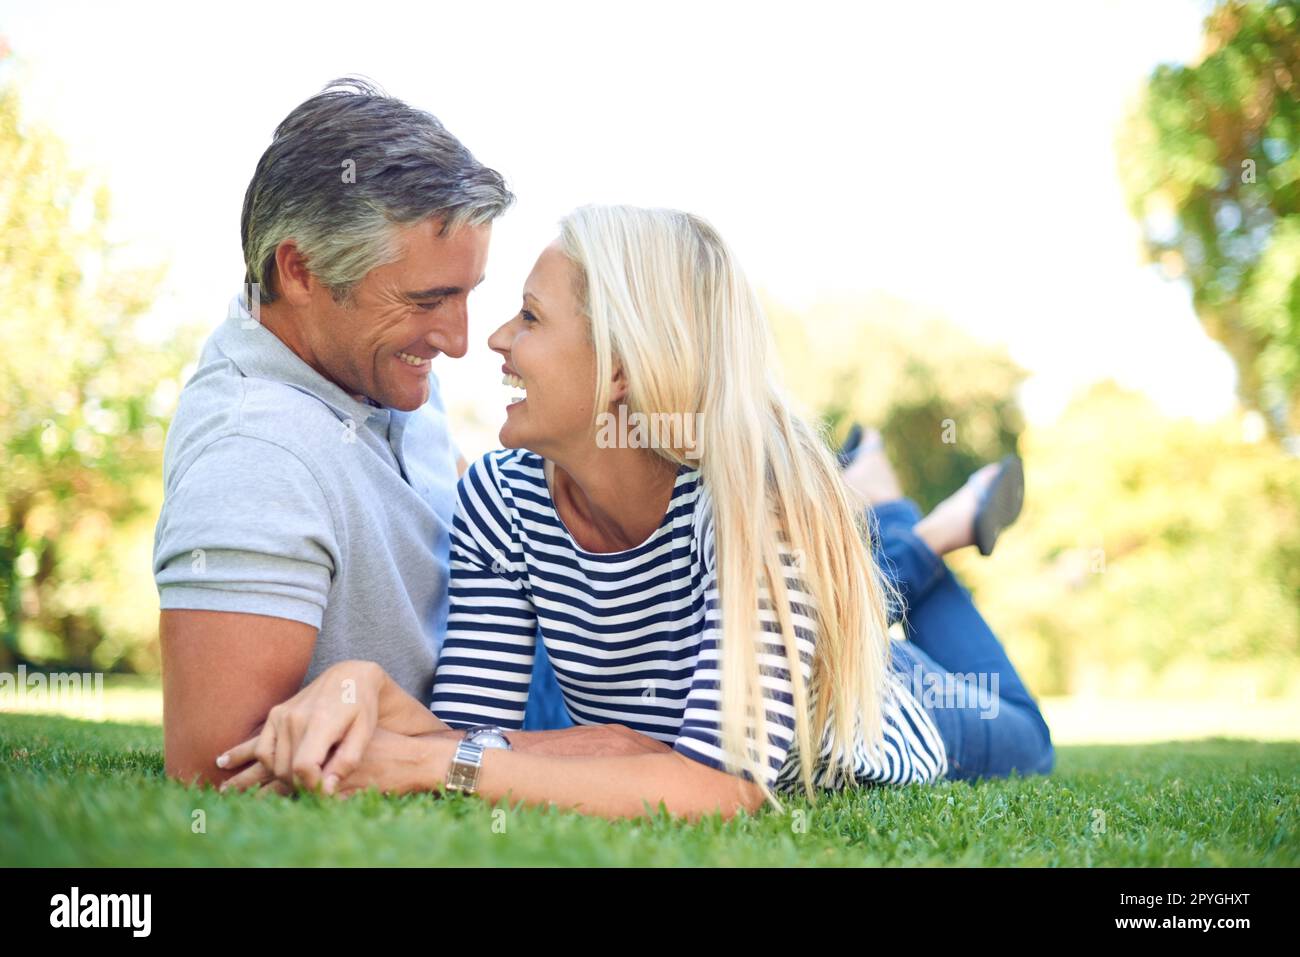 Conversation and companionship. Full length shot of an affectionate mature couple lying face to face in the park. Stock Photo